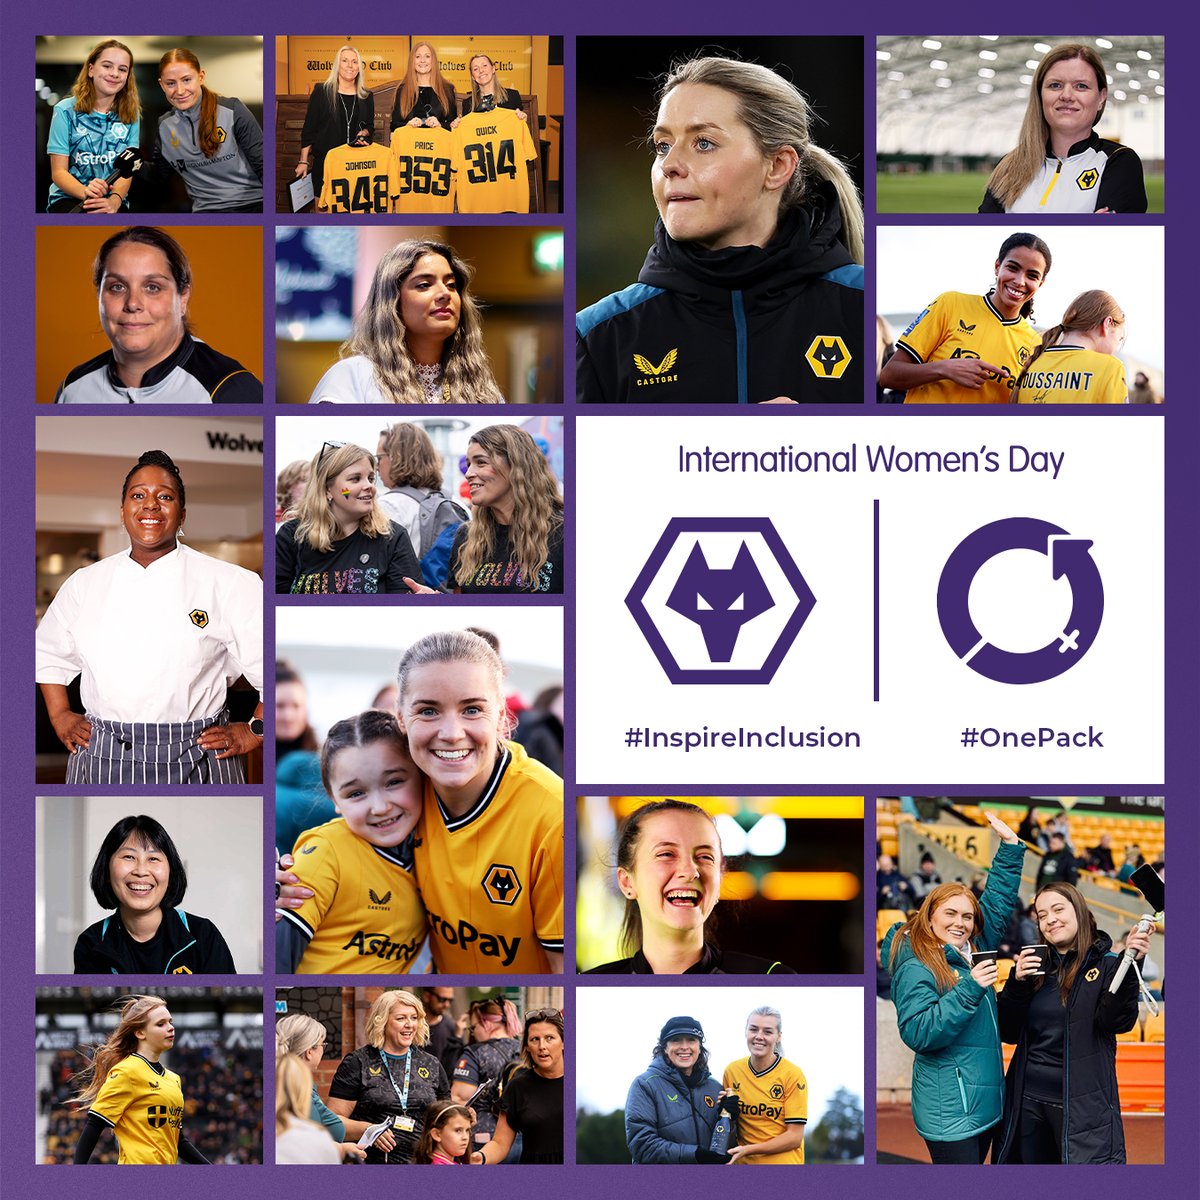 Happy #InternationalWomensDay to all of our players, staff and fans! Celebrating the women within our club and community who #InspireInclusion in sport.